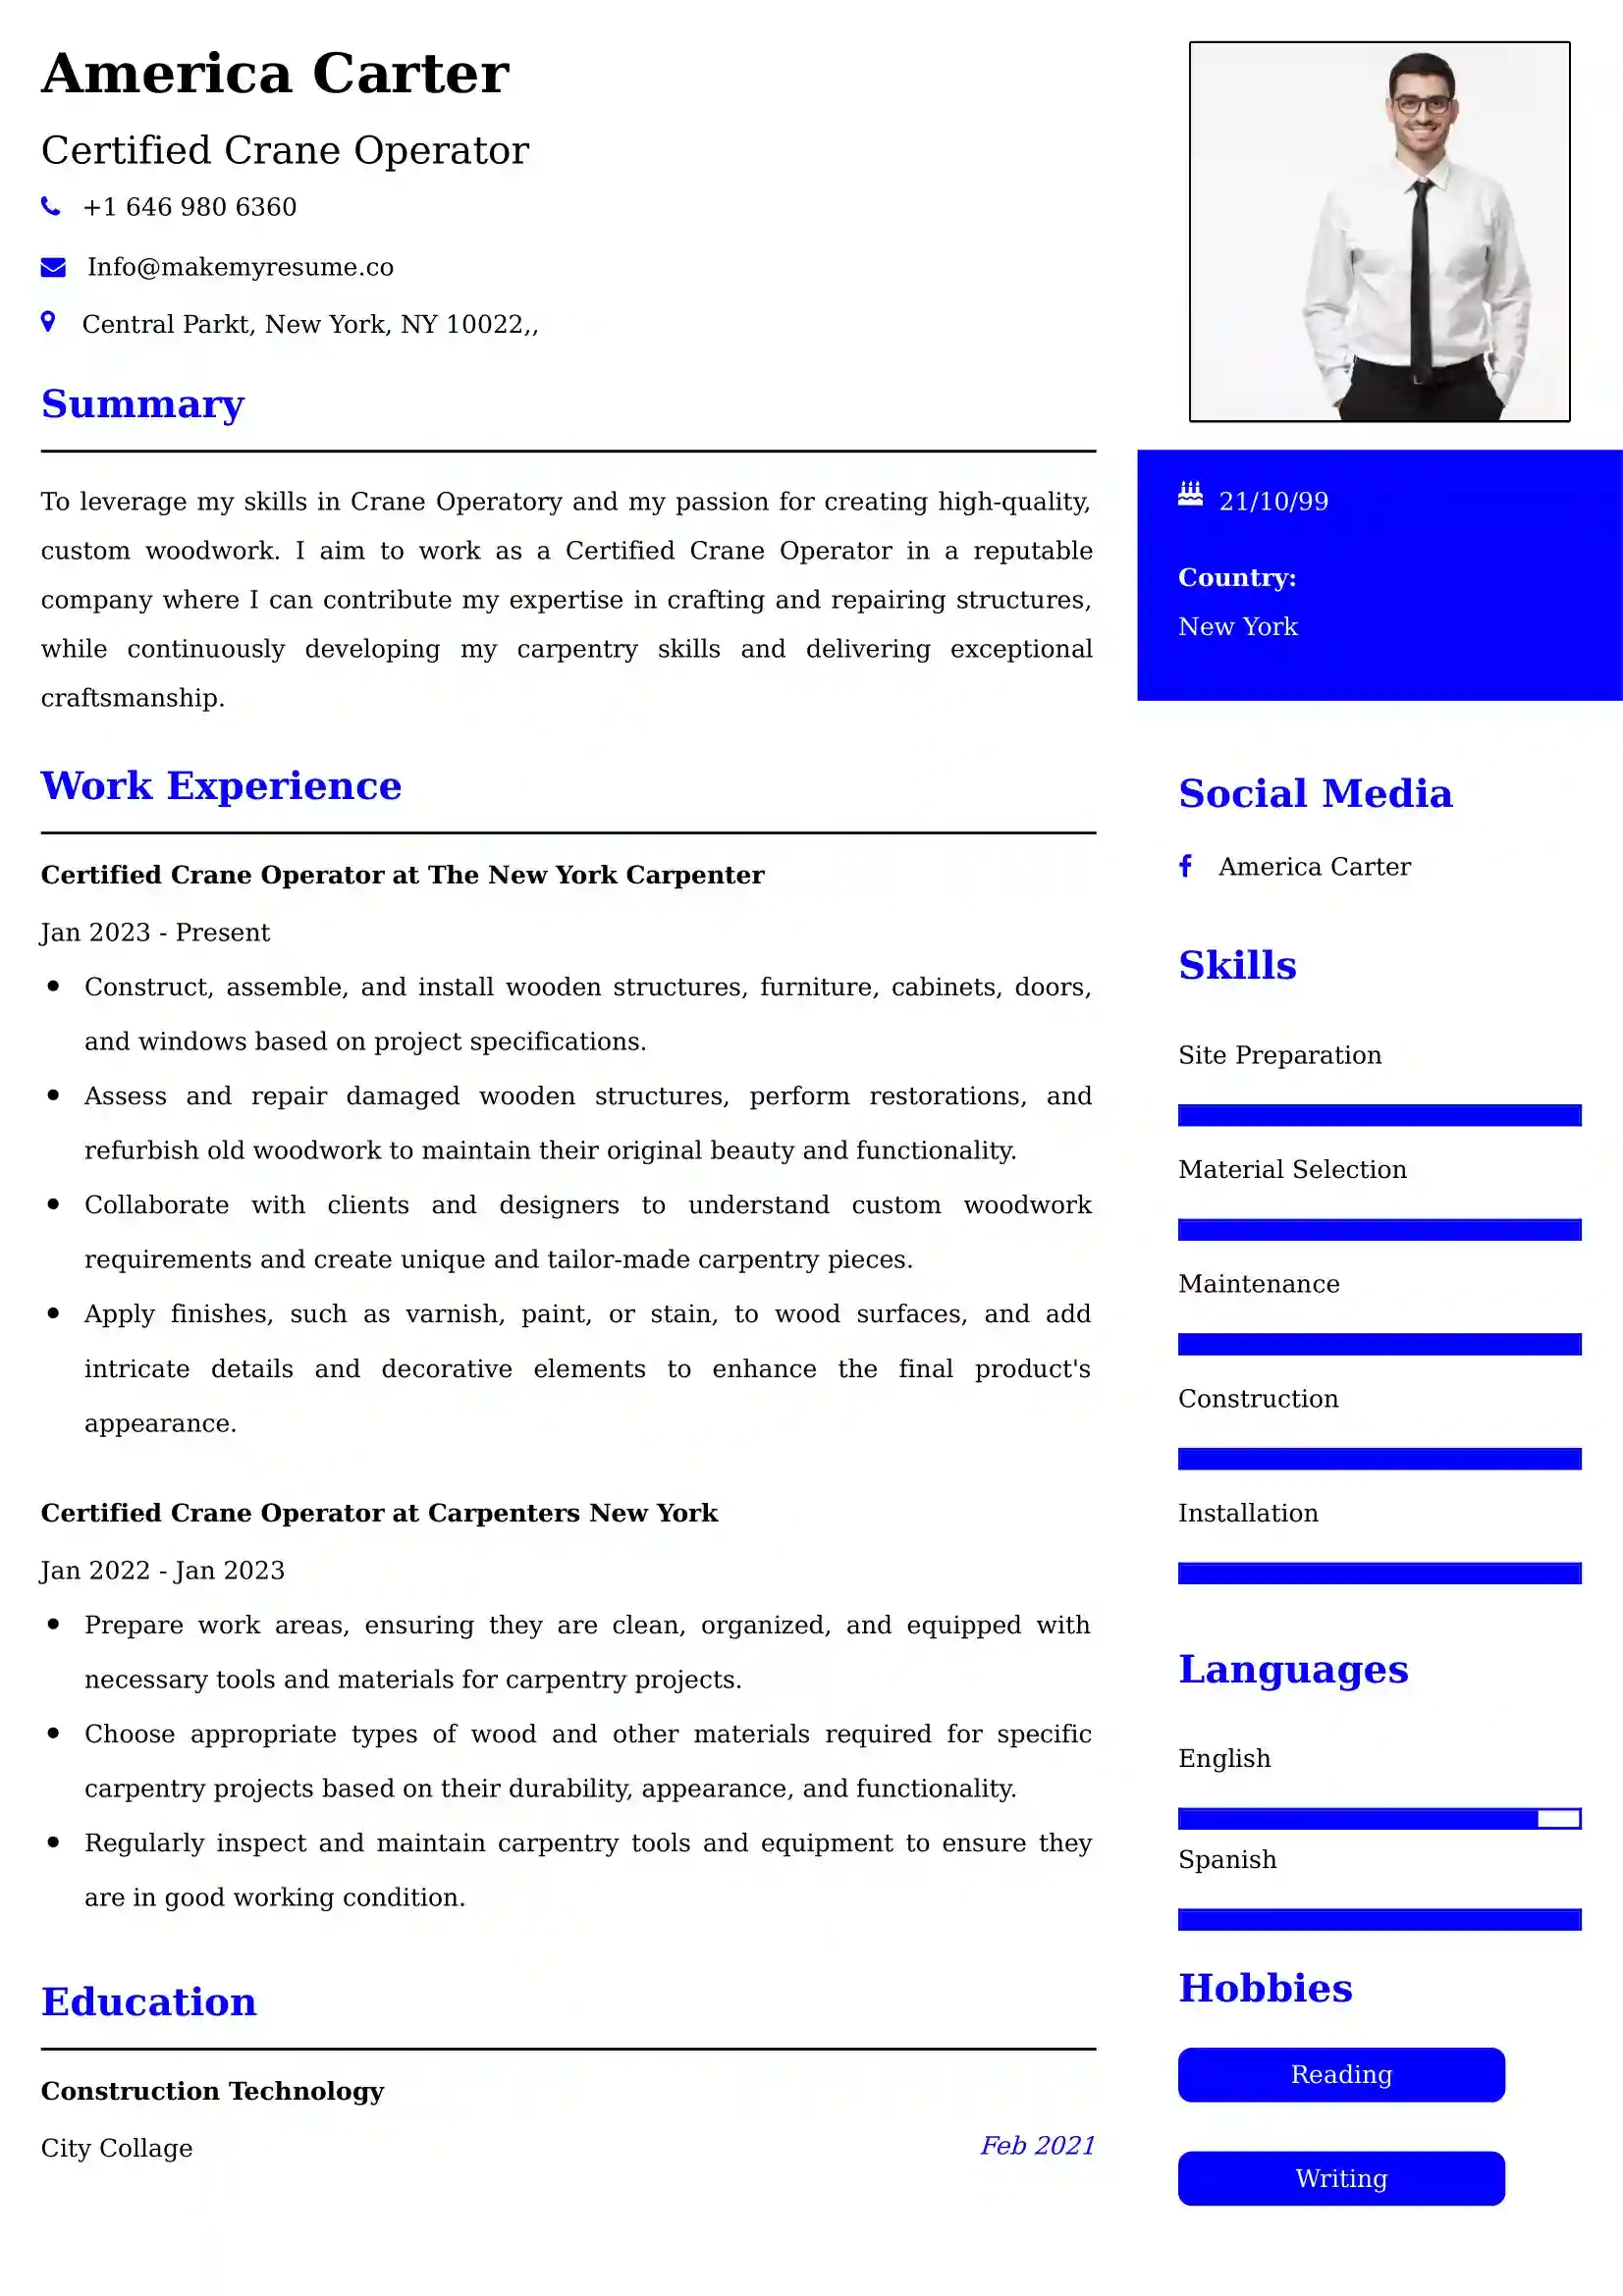 Certified Crane Operator Resume Examples - UK Format, Latest Template.